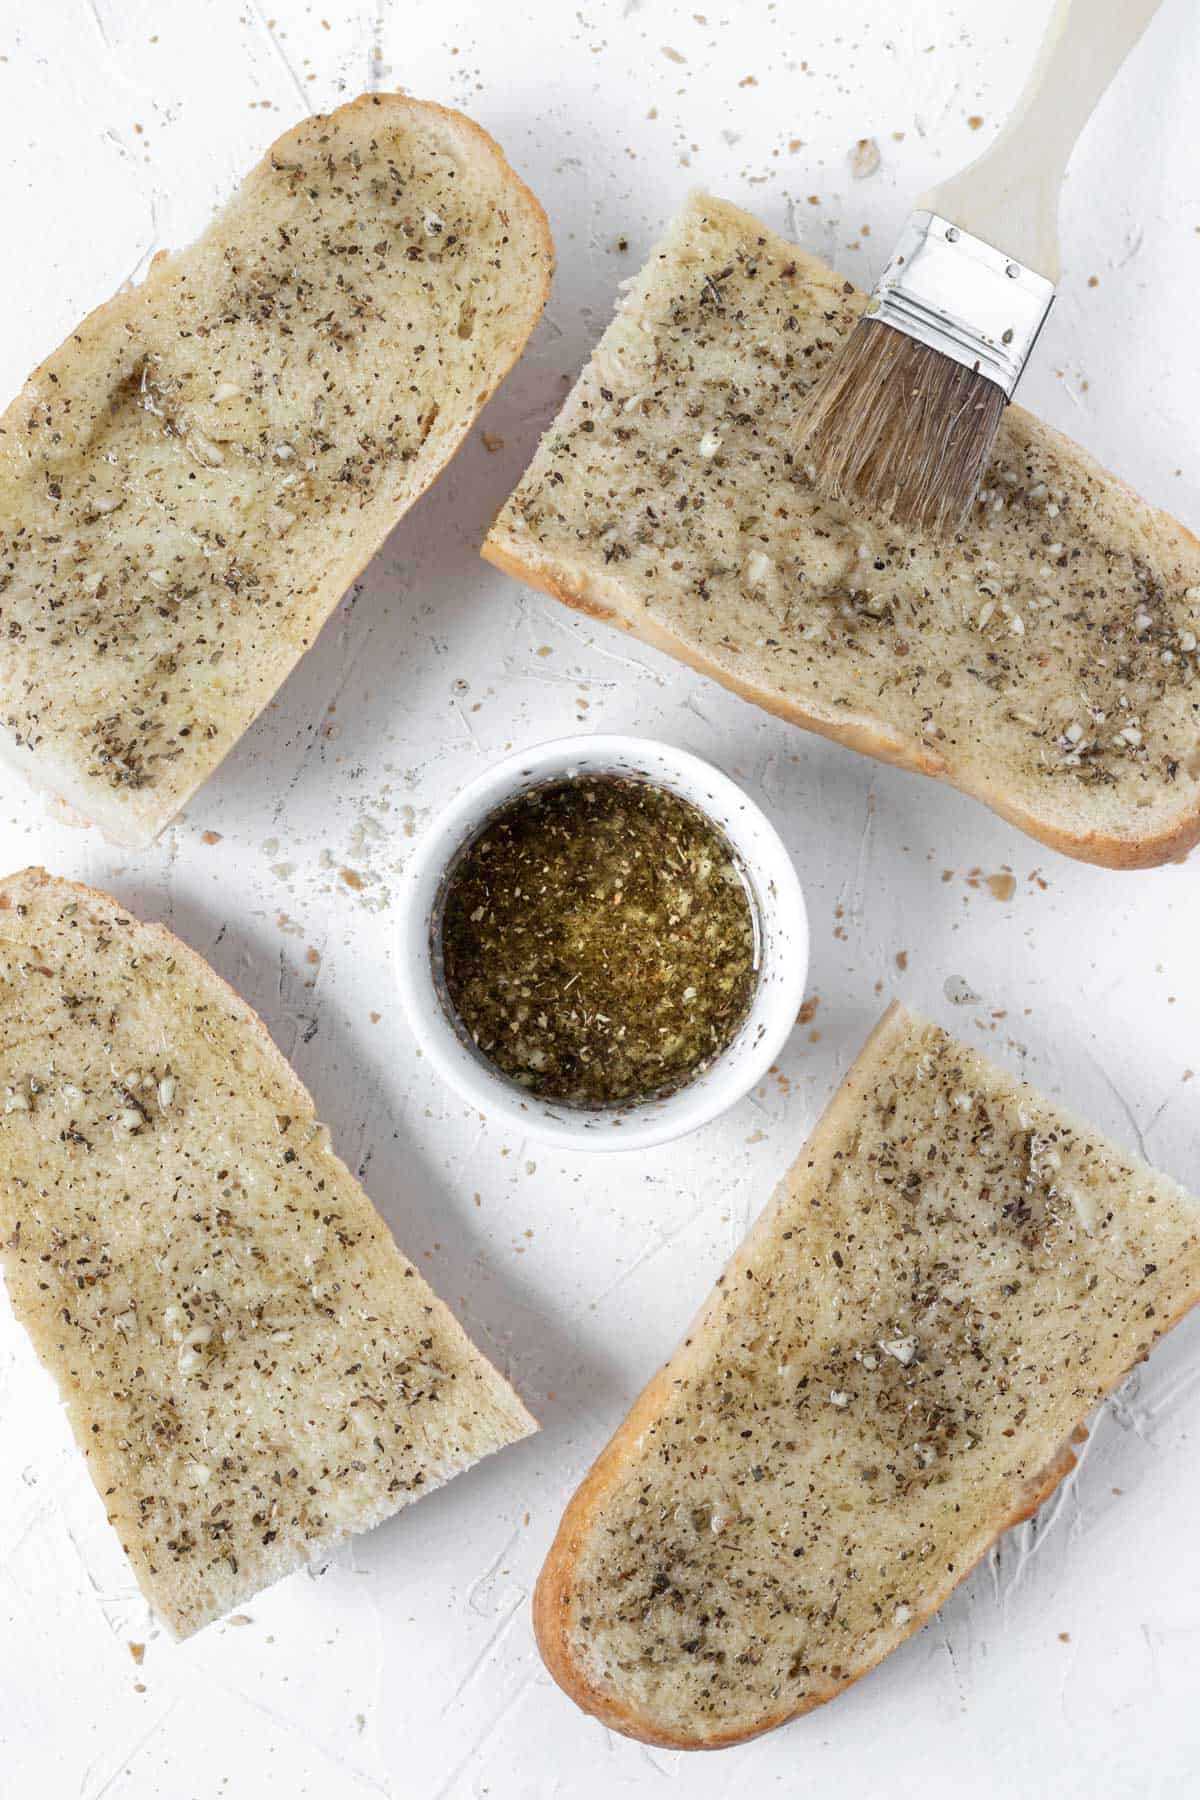 Garlic herb olive oil mixture brushed onto the 4 pieces of french bread.